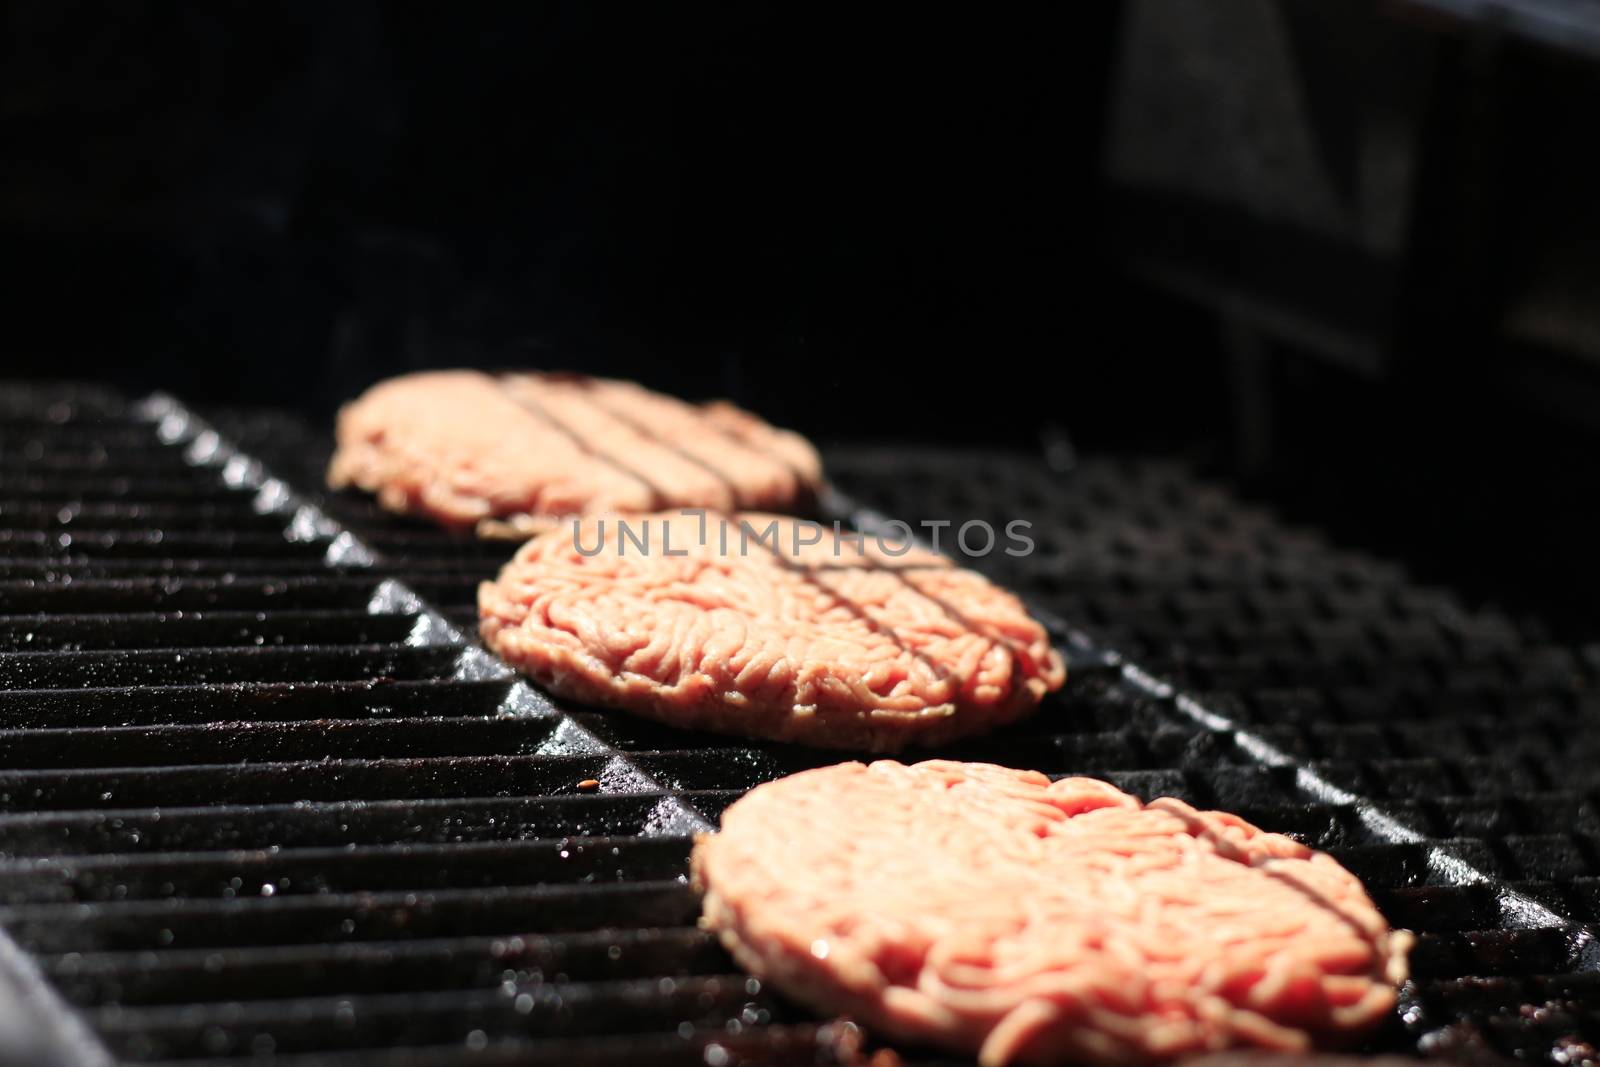 Raw burgers on bbq barbecue grill with fire. Food meat - raw burgers on bbq barbecue grill with fire. Shallow dof by mynewturtle1